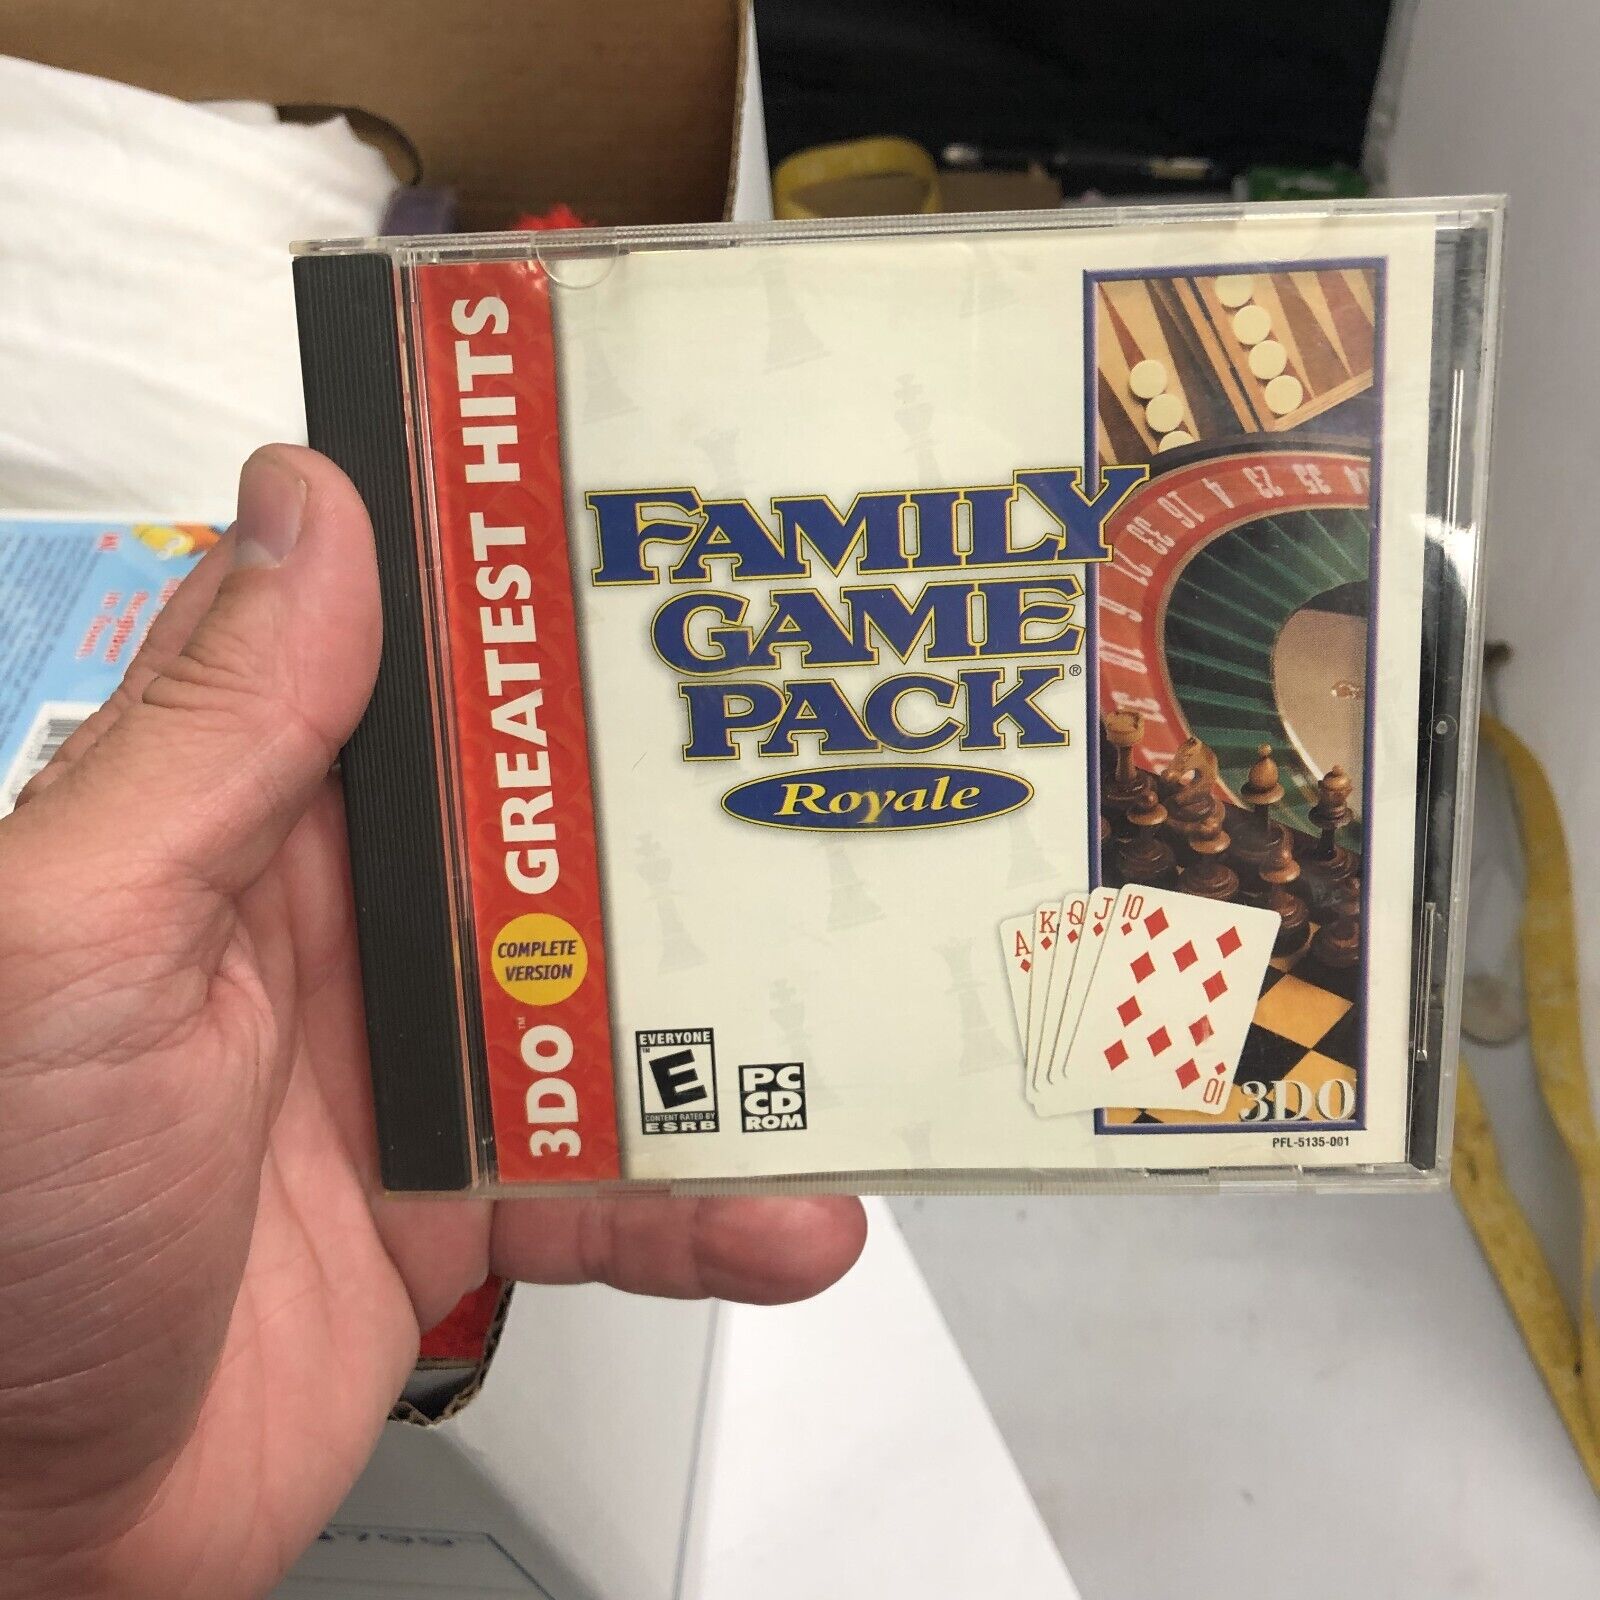 Family Game Pack Royale The Ultimate Collection (CD, 1999, 3DO)